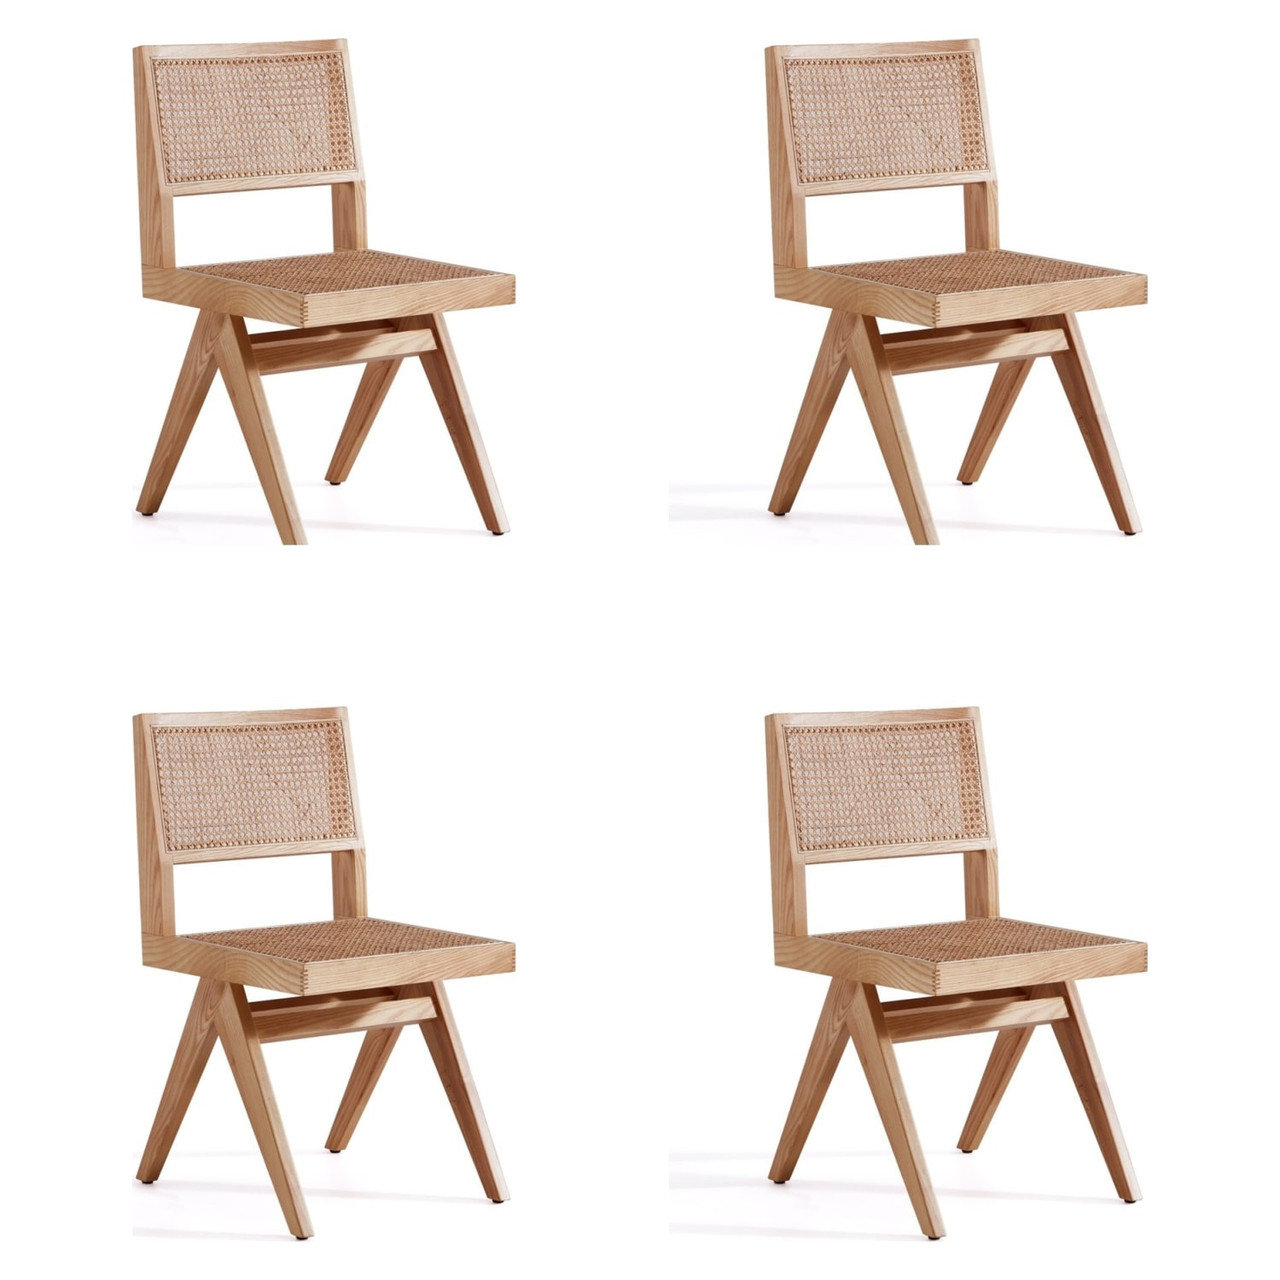 Hamlet Dining Chair in Nature Cane - Set of 4